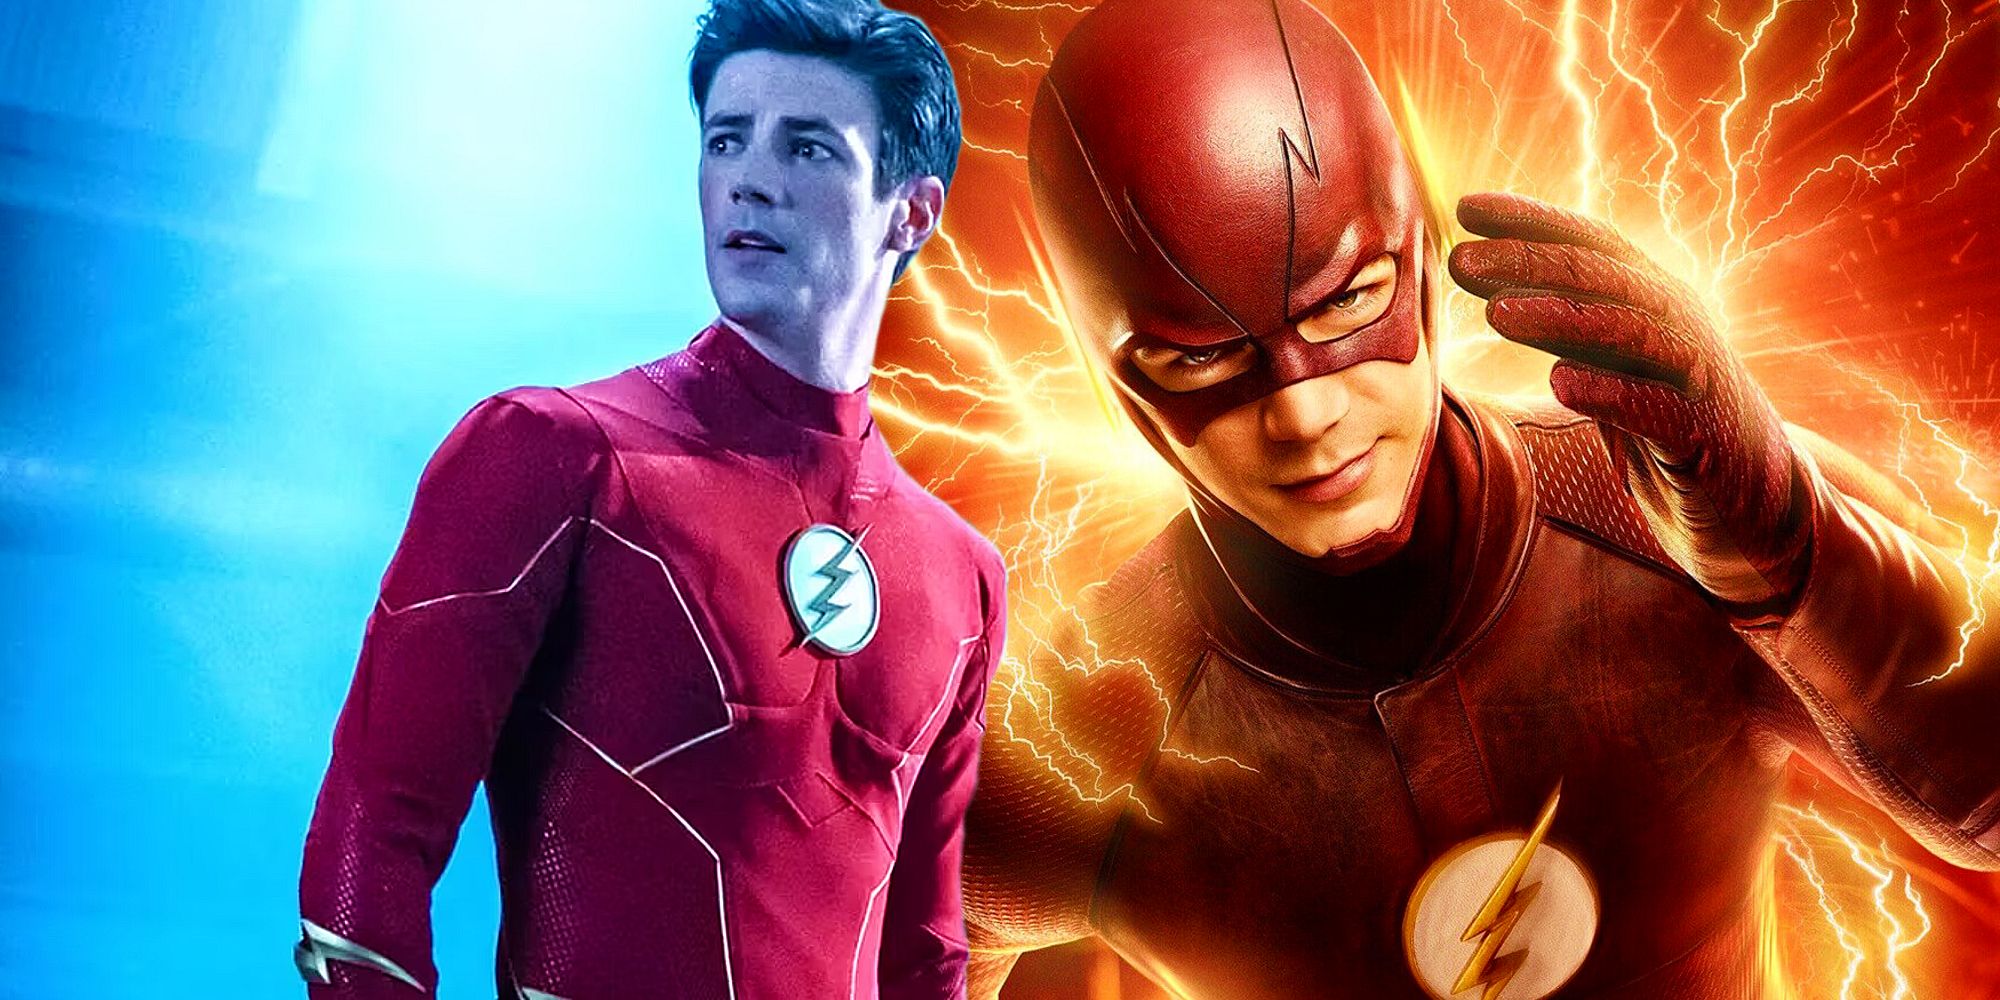 Grant Gustin as The Flash in the CW show next to the official poster